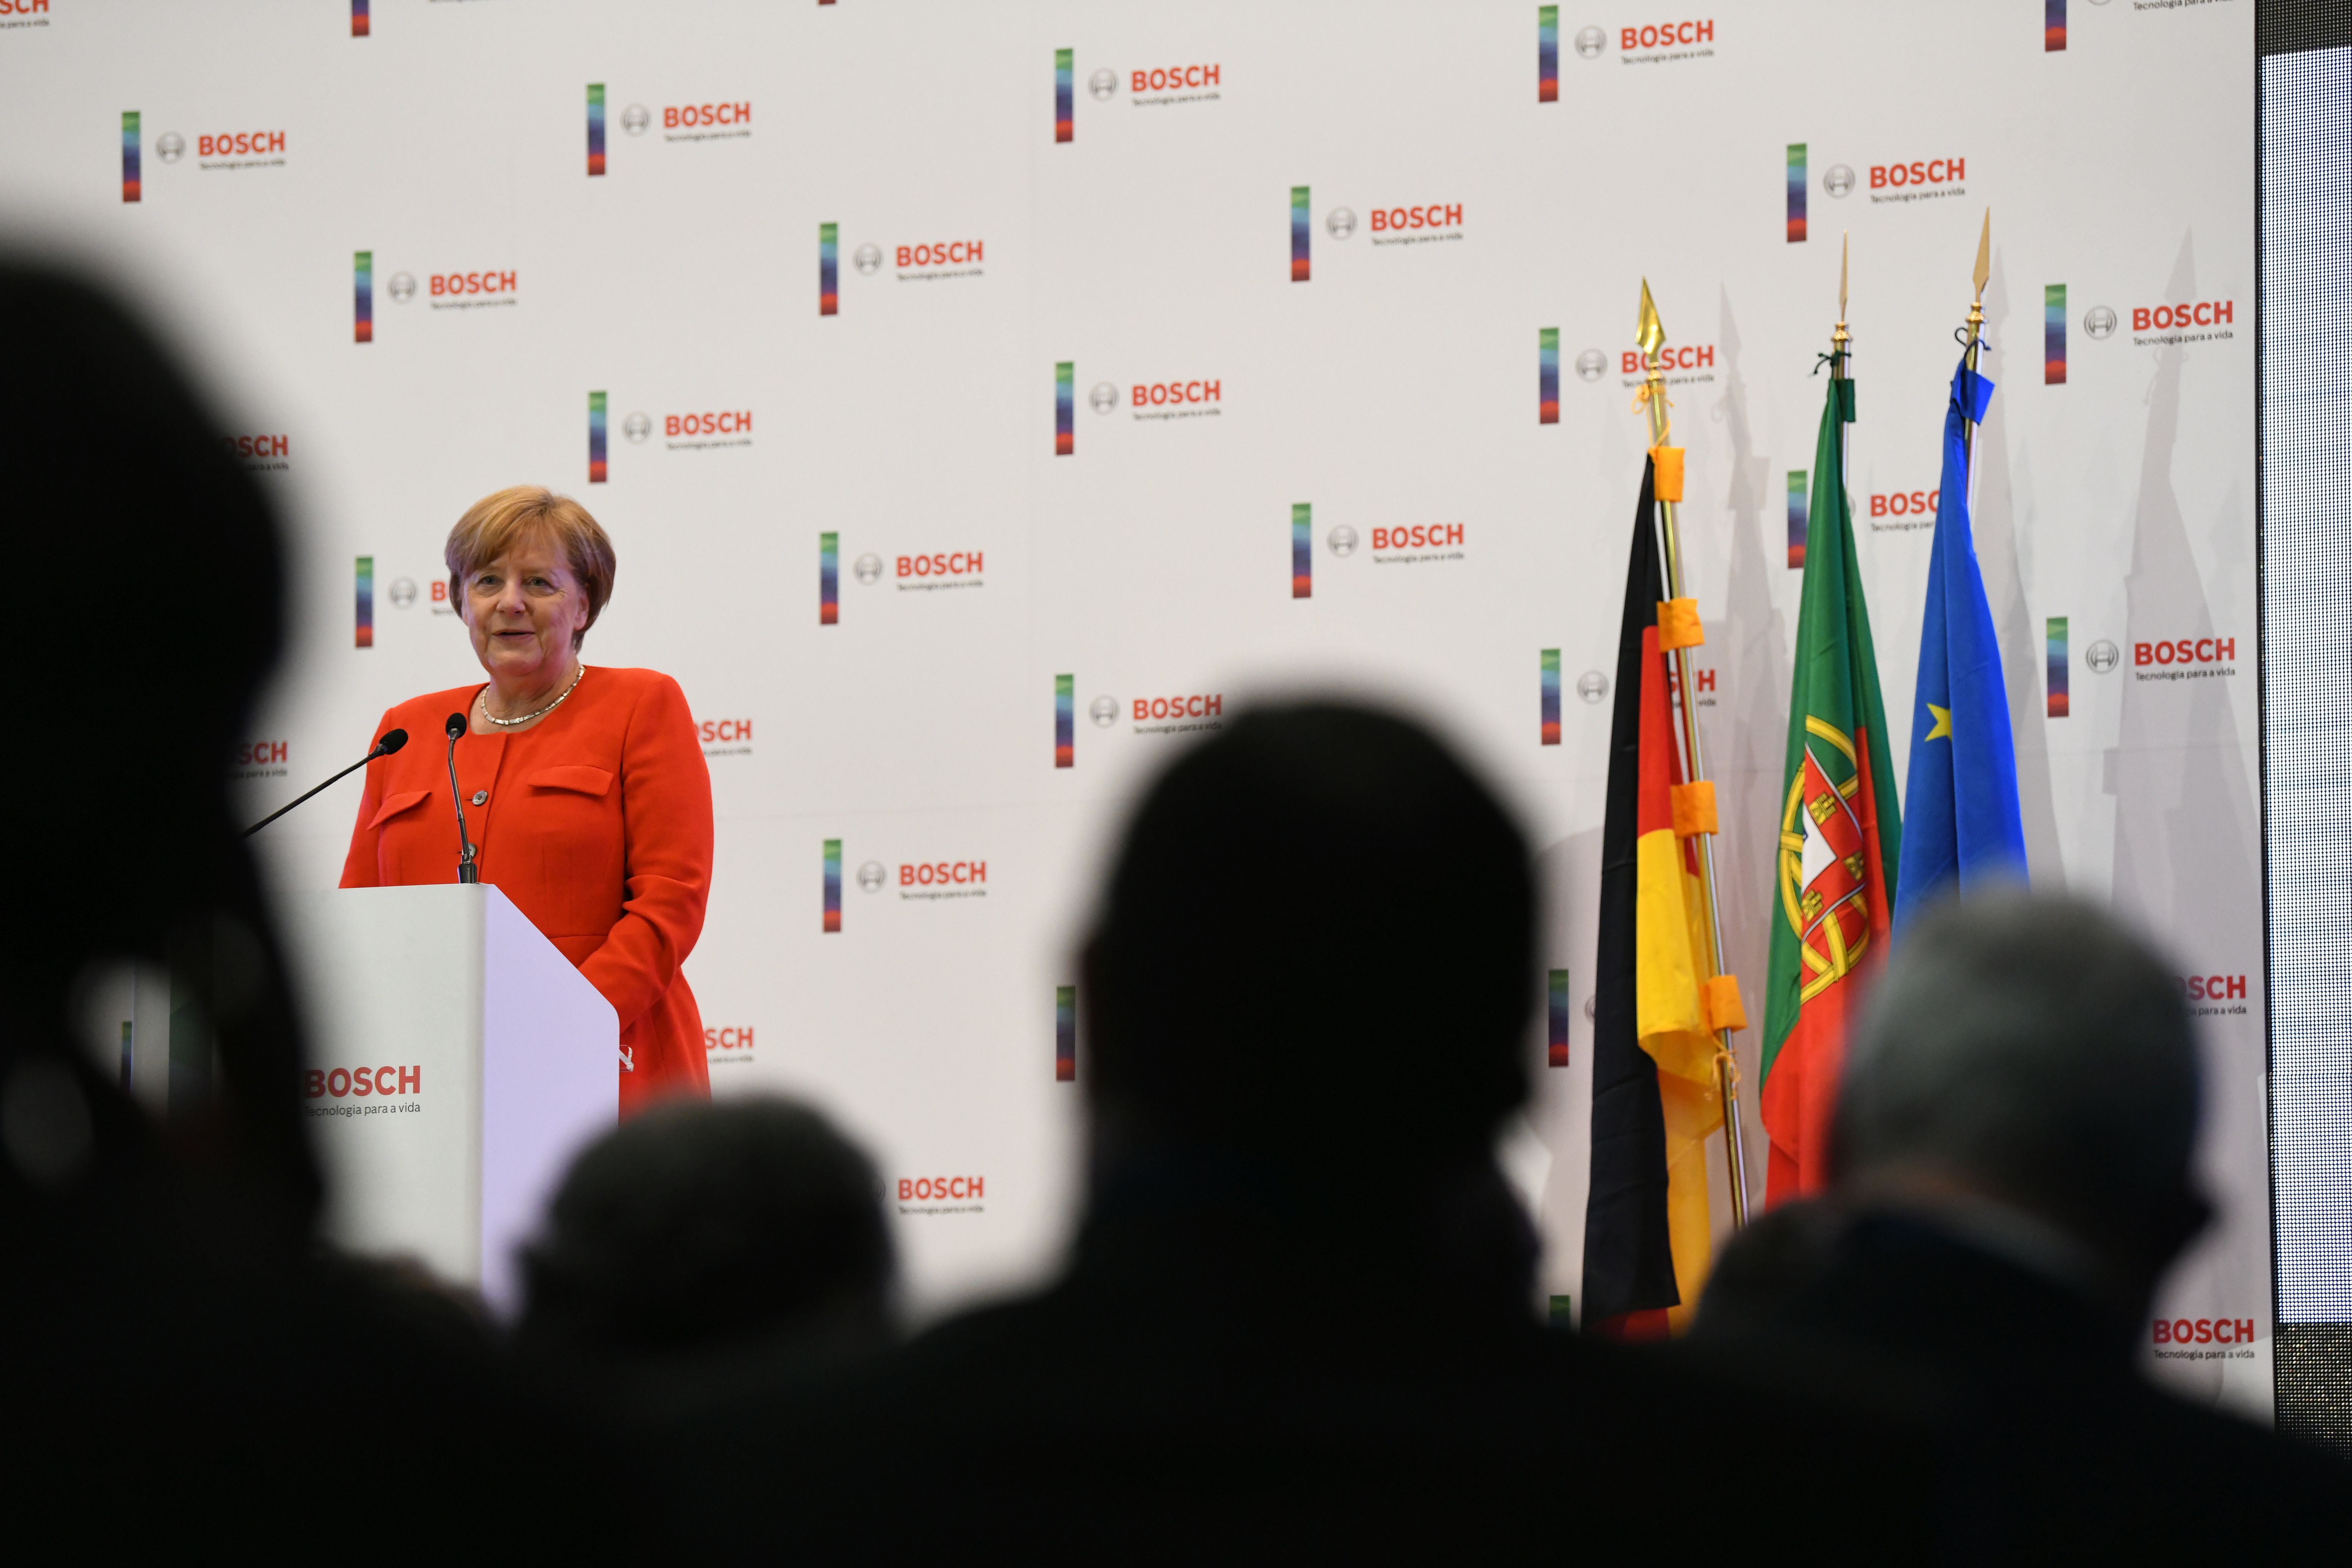 Political VIPs at Bosch: chancellor Merkel and prime minister Costa open technology center in Portugal